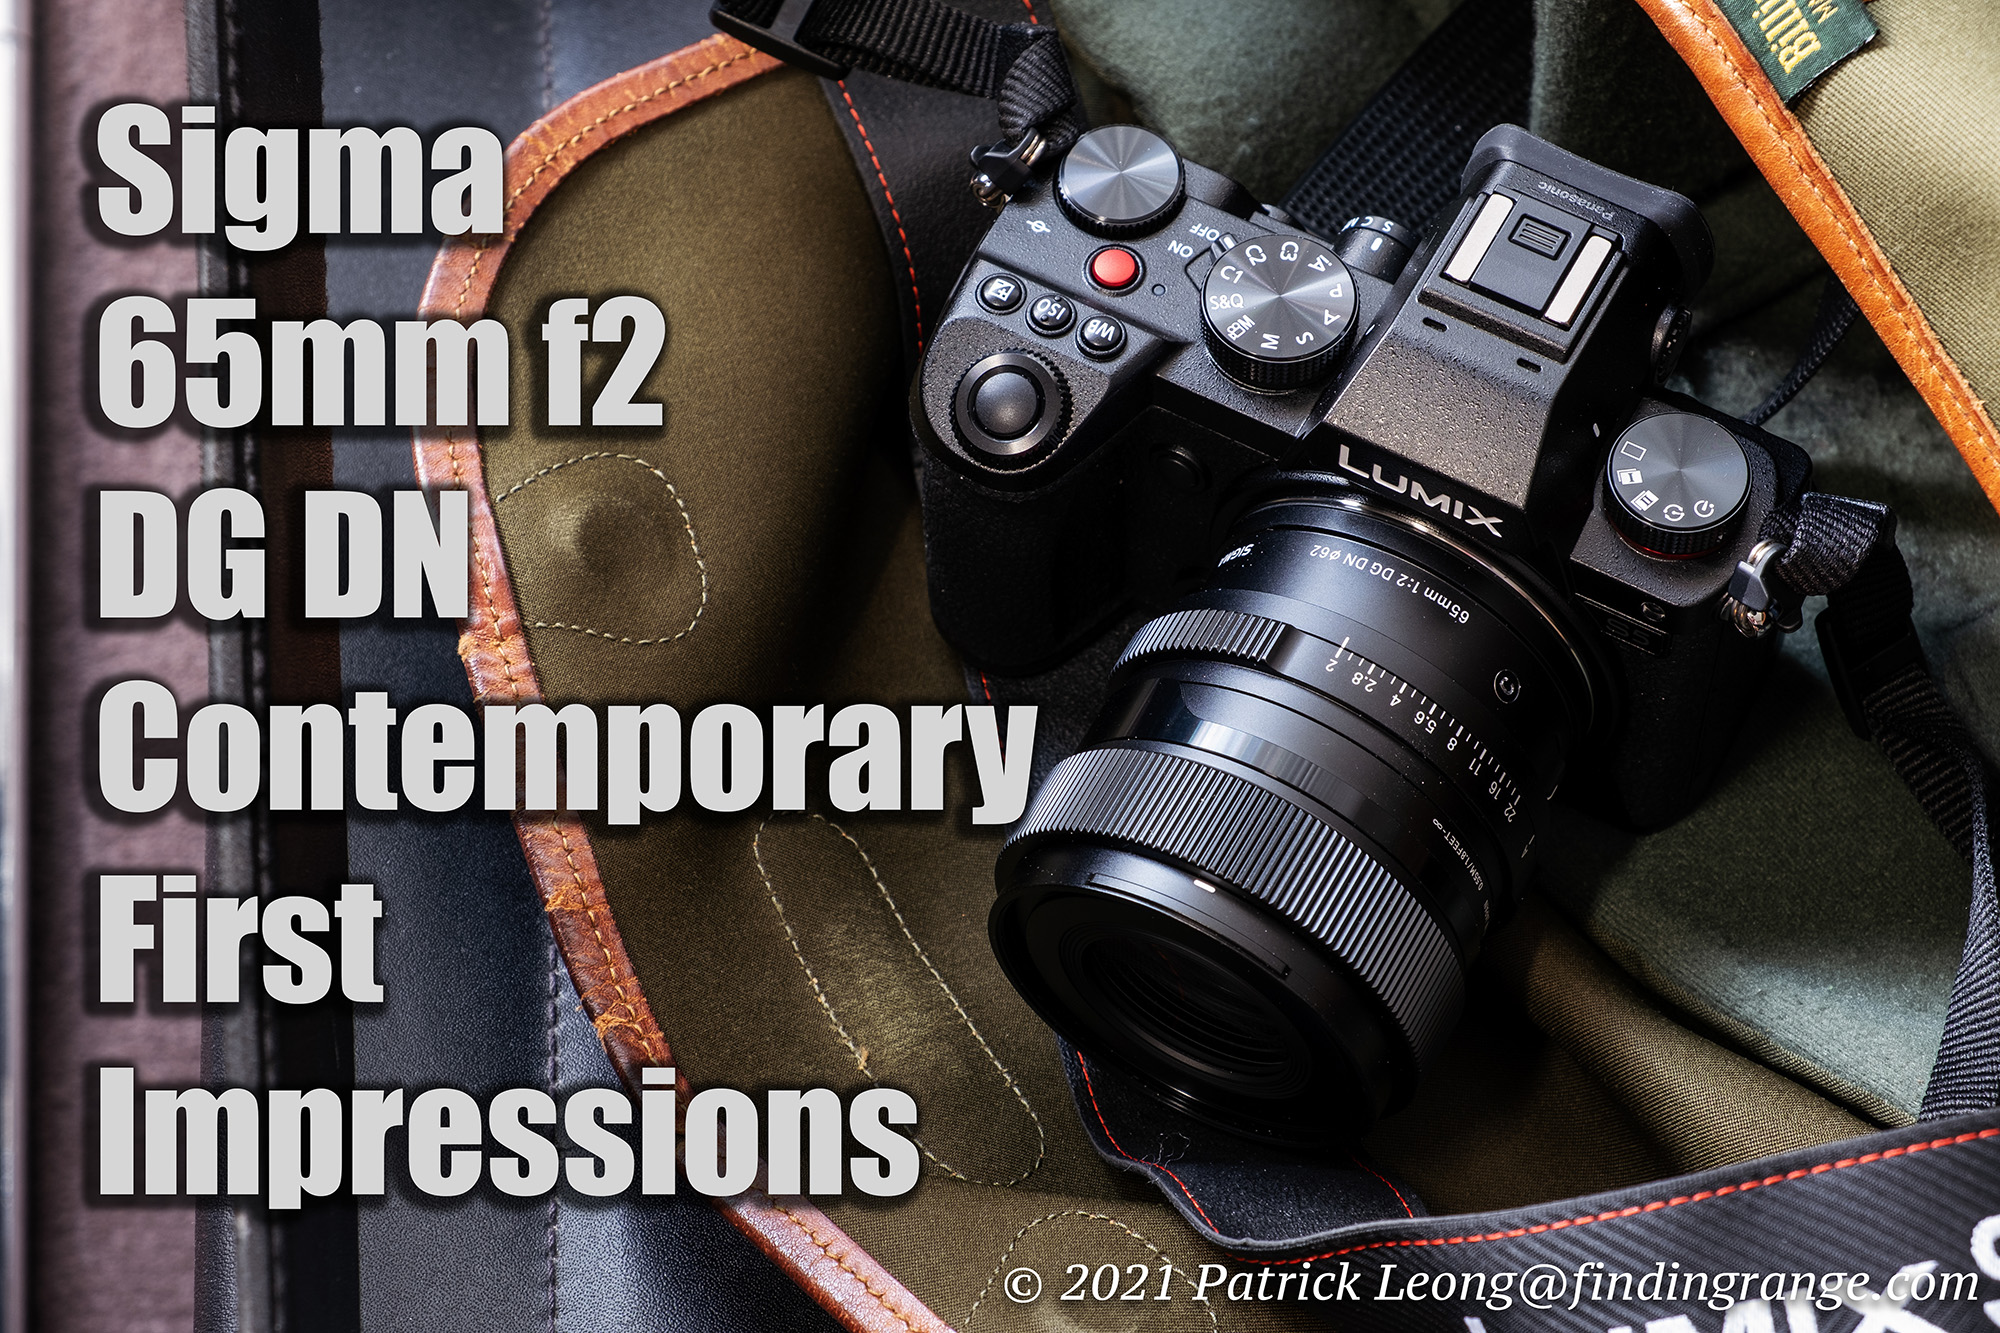 Sigma 65mm f2 DG DN Contemporary First Impressions - Finding Range